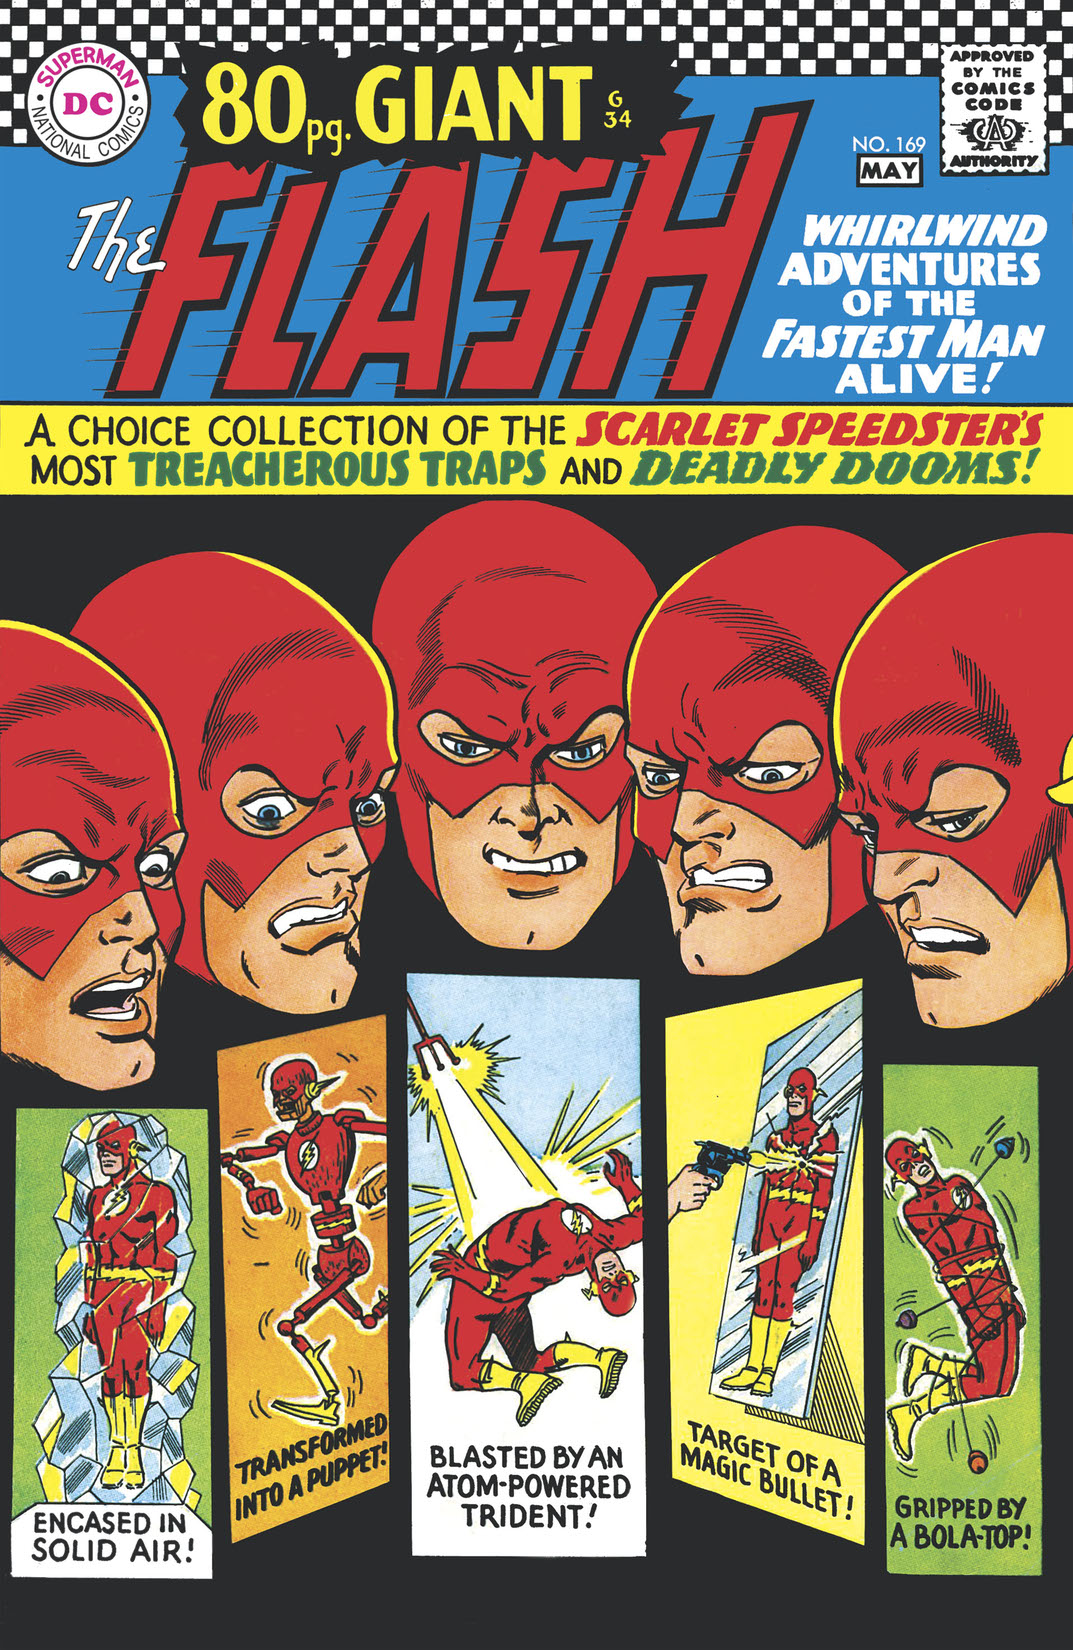 The Flash (1959-) #169 preview images